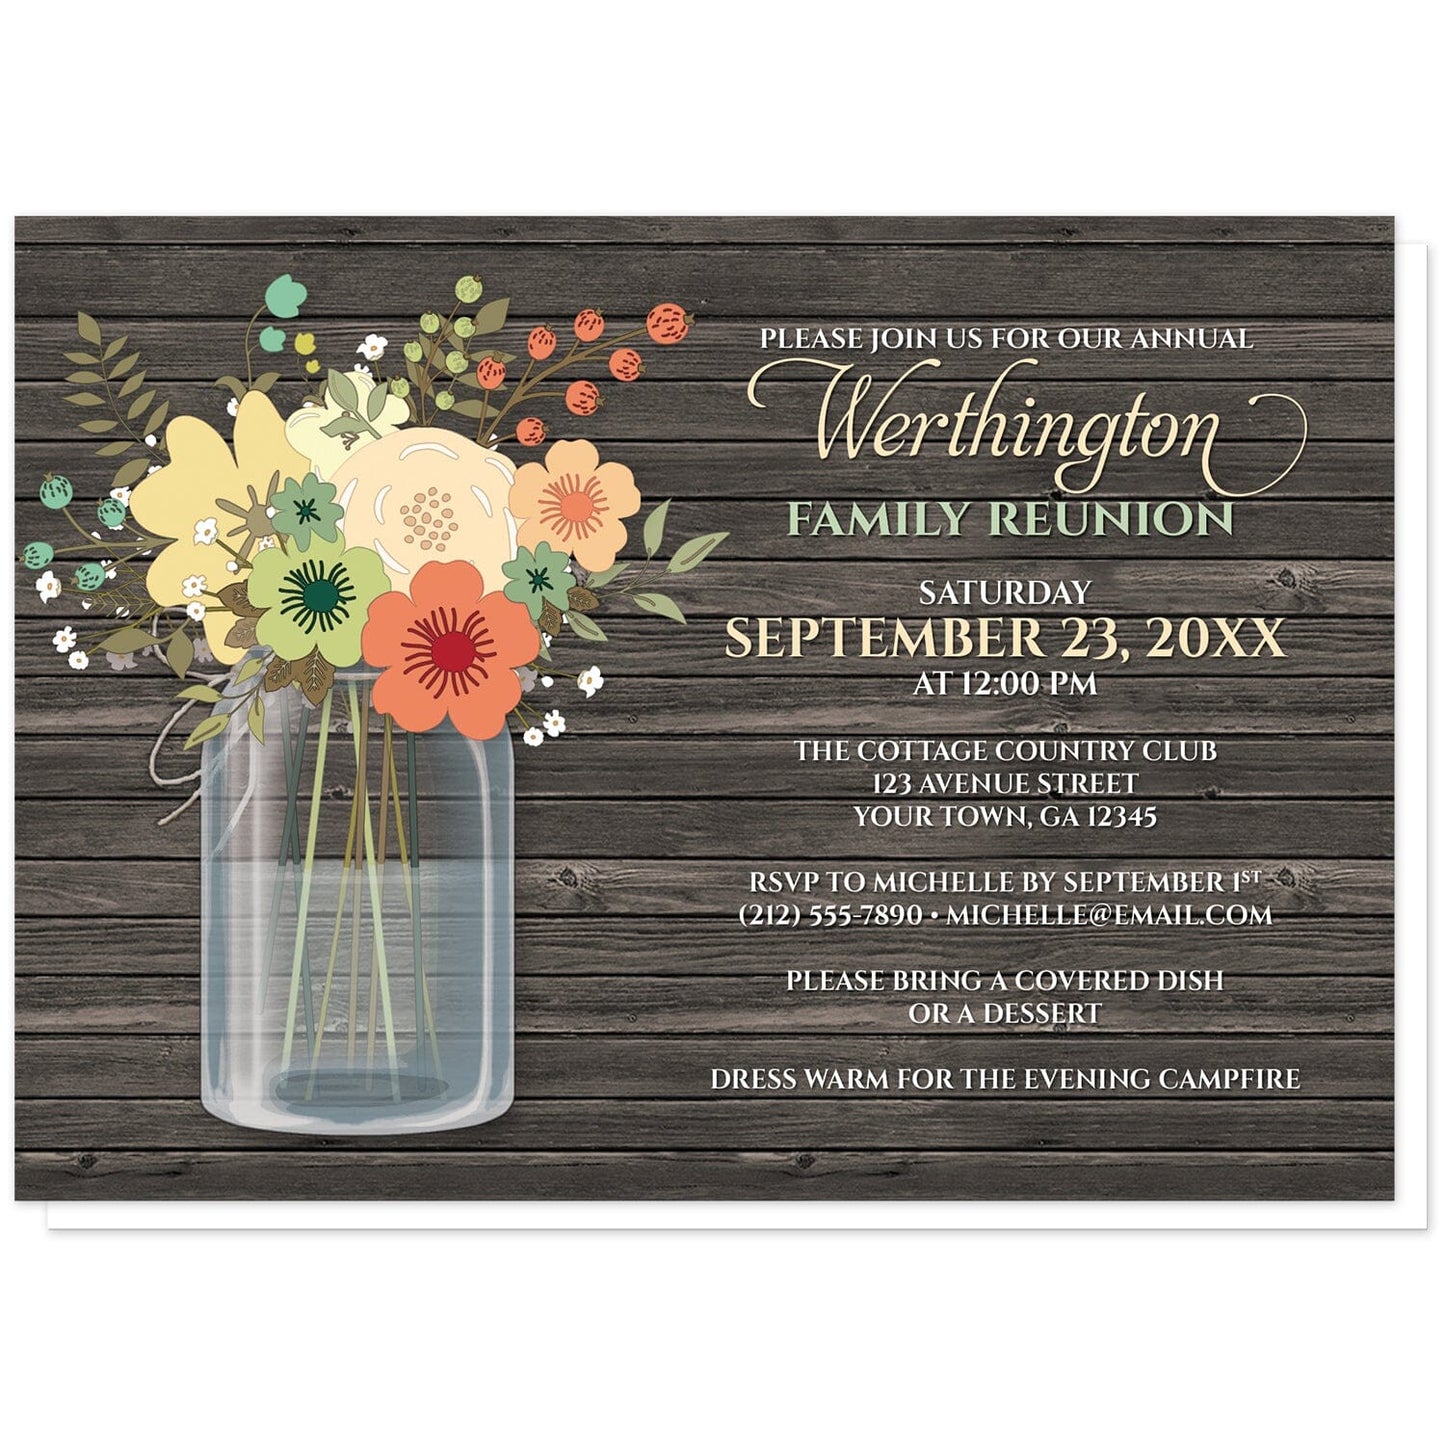 Rustic Floral Wood Mason Jar Family Reunion Invitations at Artistically Invited. Beautiful rustic floral wood mason jar family reunion invitations with a pretty orange and teal floral mason jar theme with yellow, beige, and green accent flowers. Your personalized reunion details are custom printed in beige, green, and white over a dark brown rustic wood pattern background next to the mason jar illustration, in both script and all-capital letters fonts.